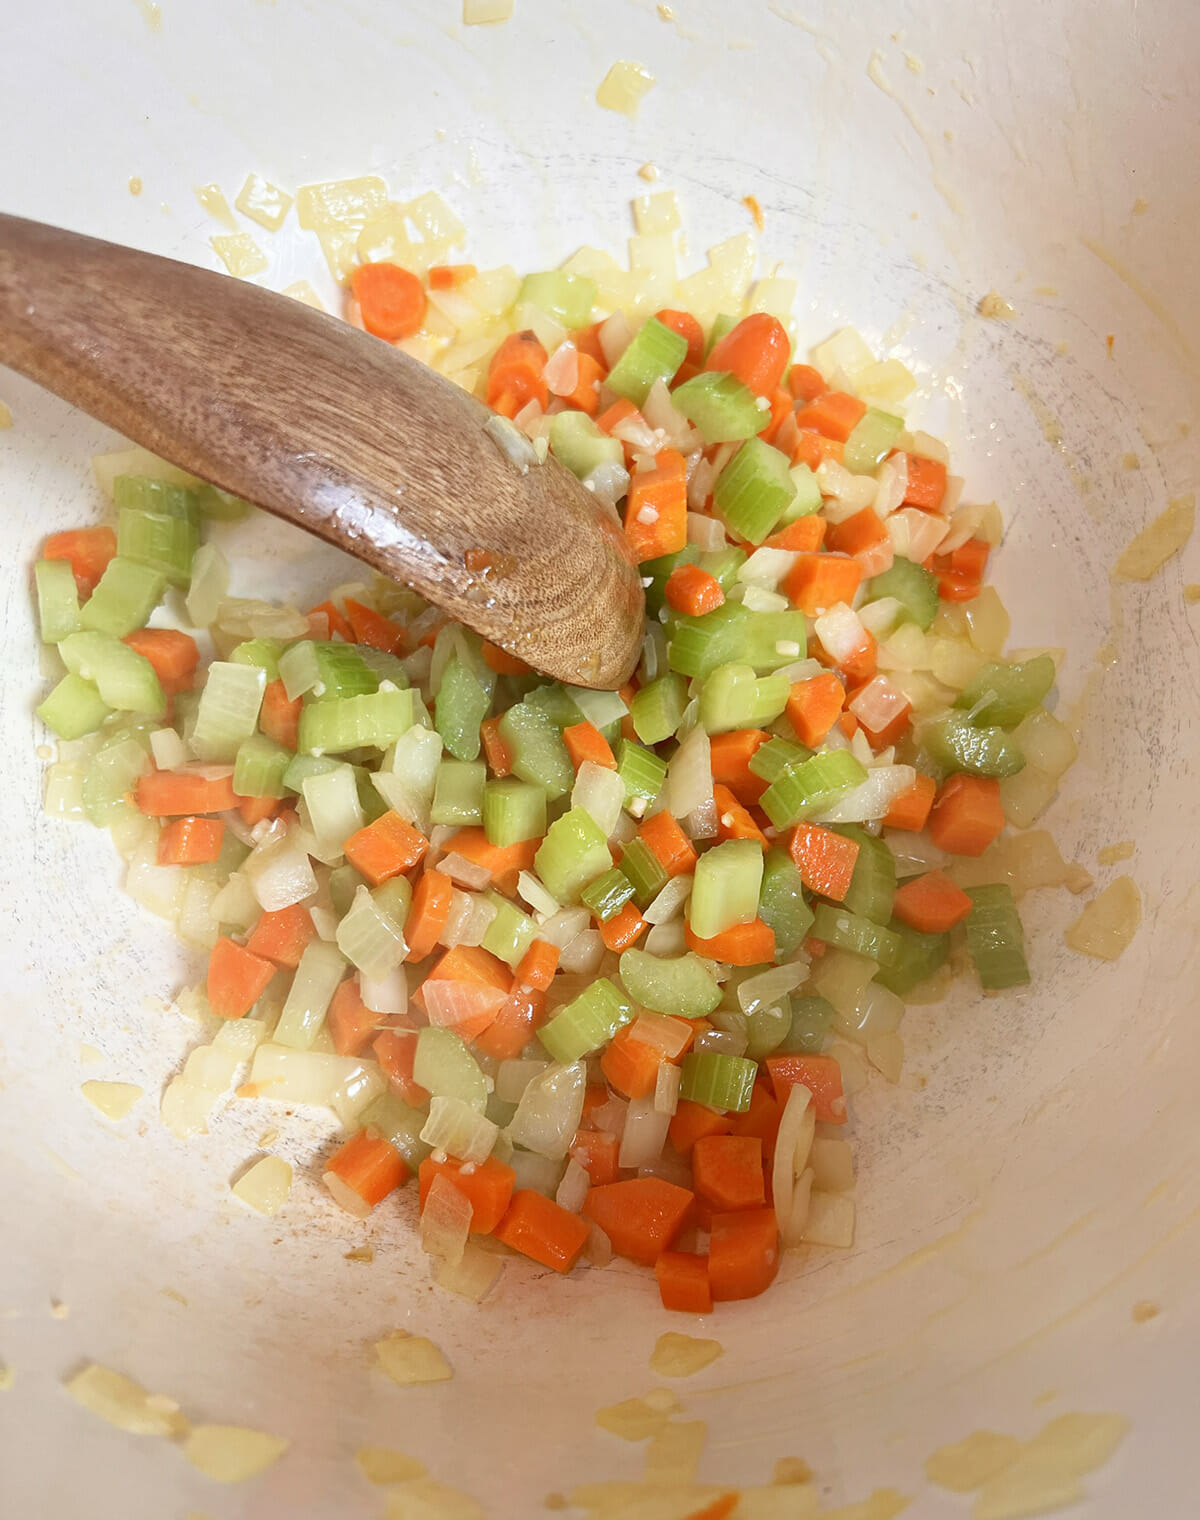 Cooking the vegetables for Jason's red lentil soup recipe.